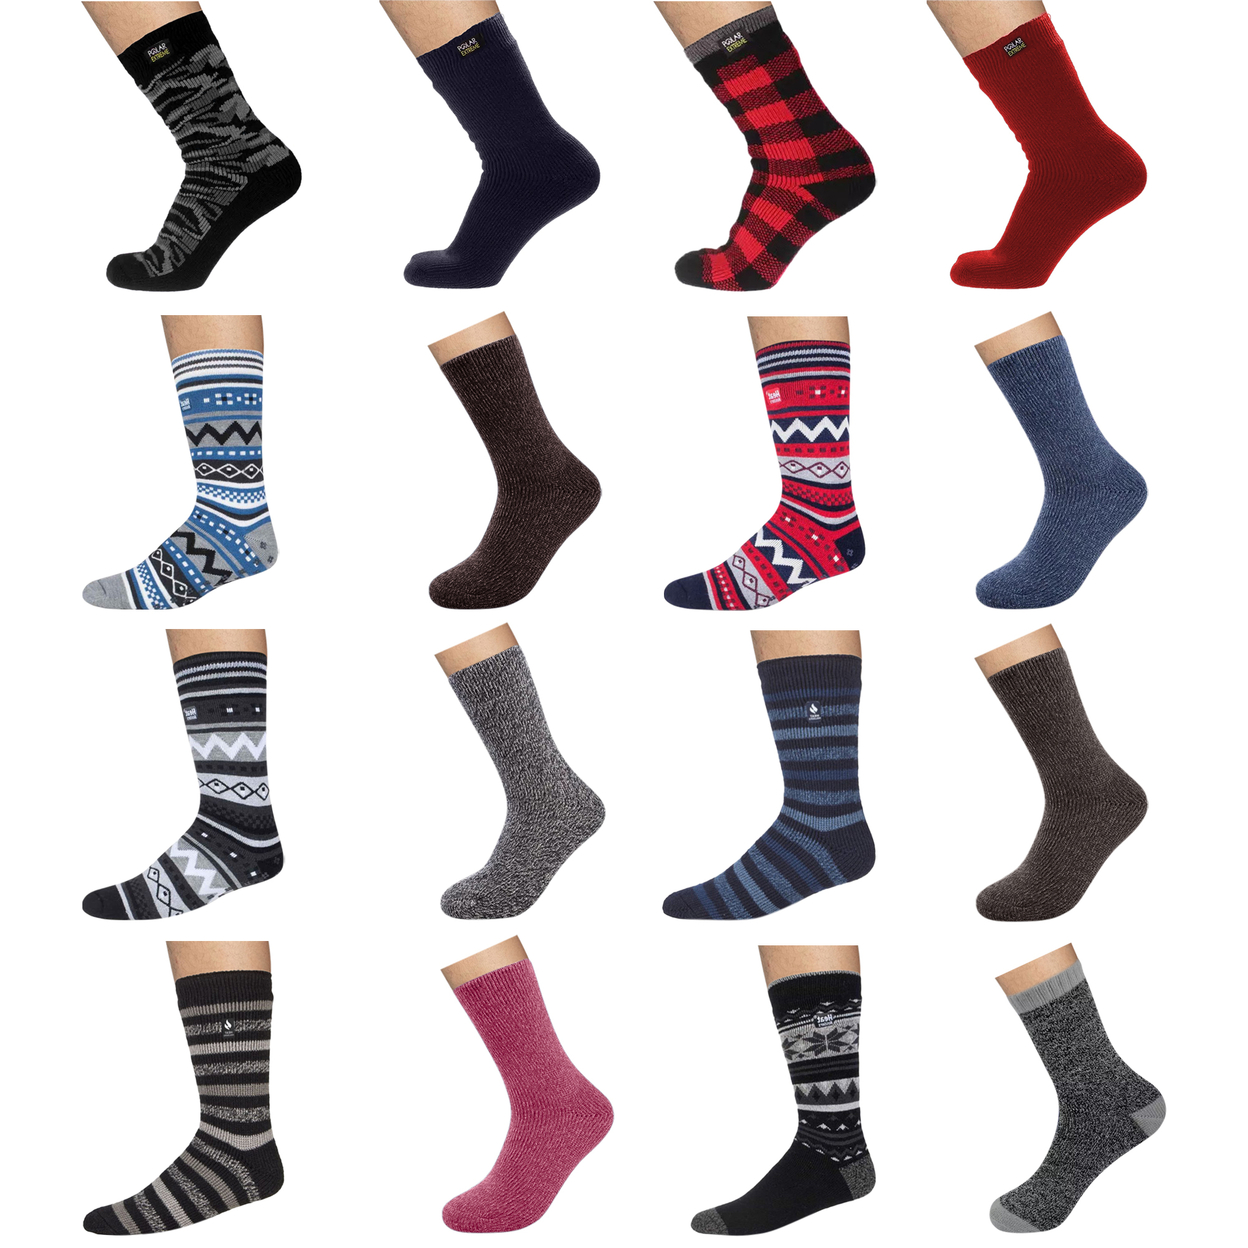 Multi-Pairs: Men's Polar Extreme Insulated Thermal Ultra-Soft Winter Warm Crew Socks - 4-pack